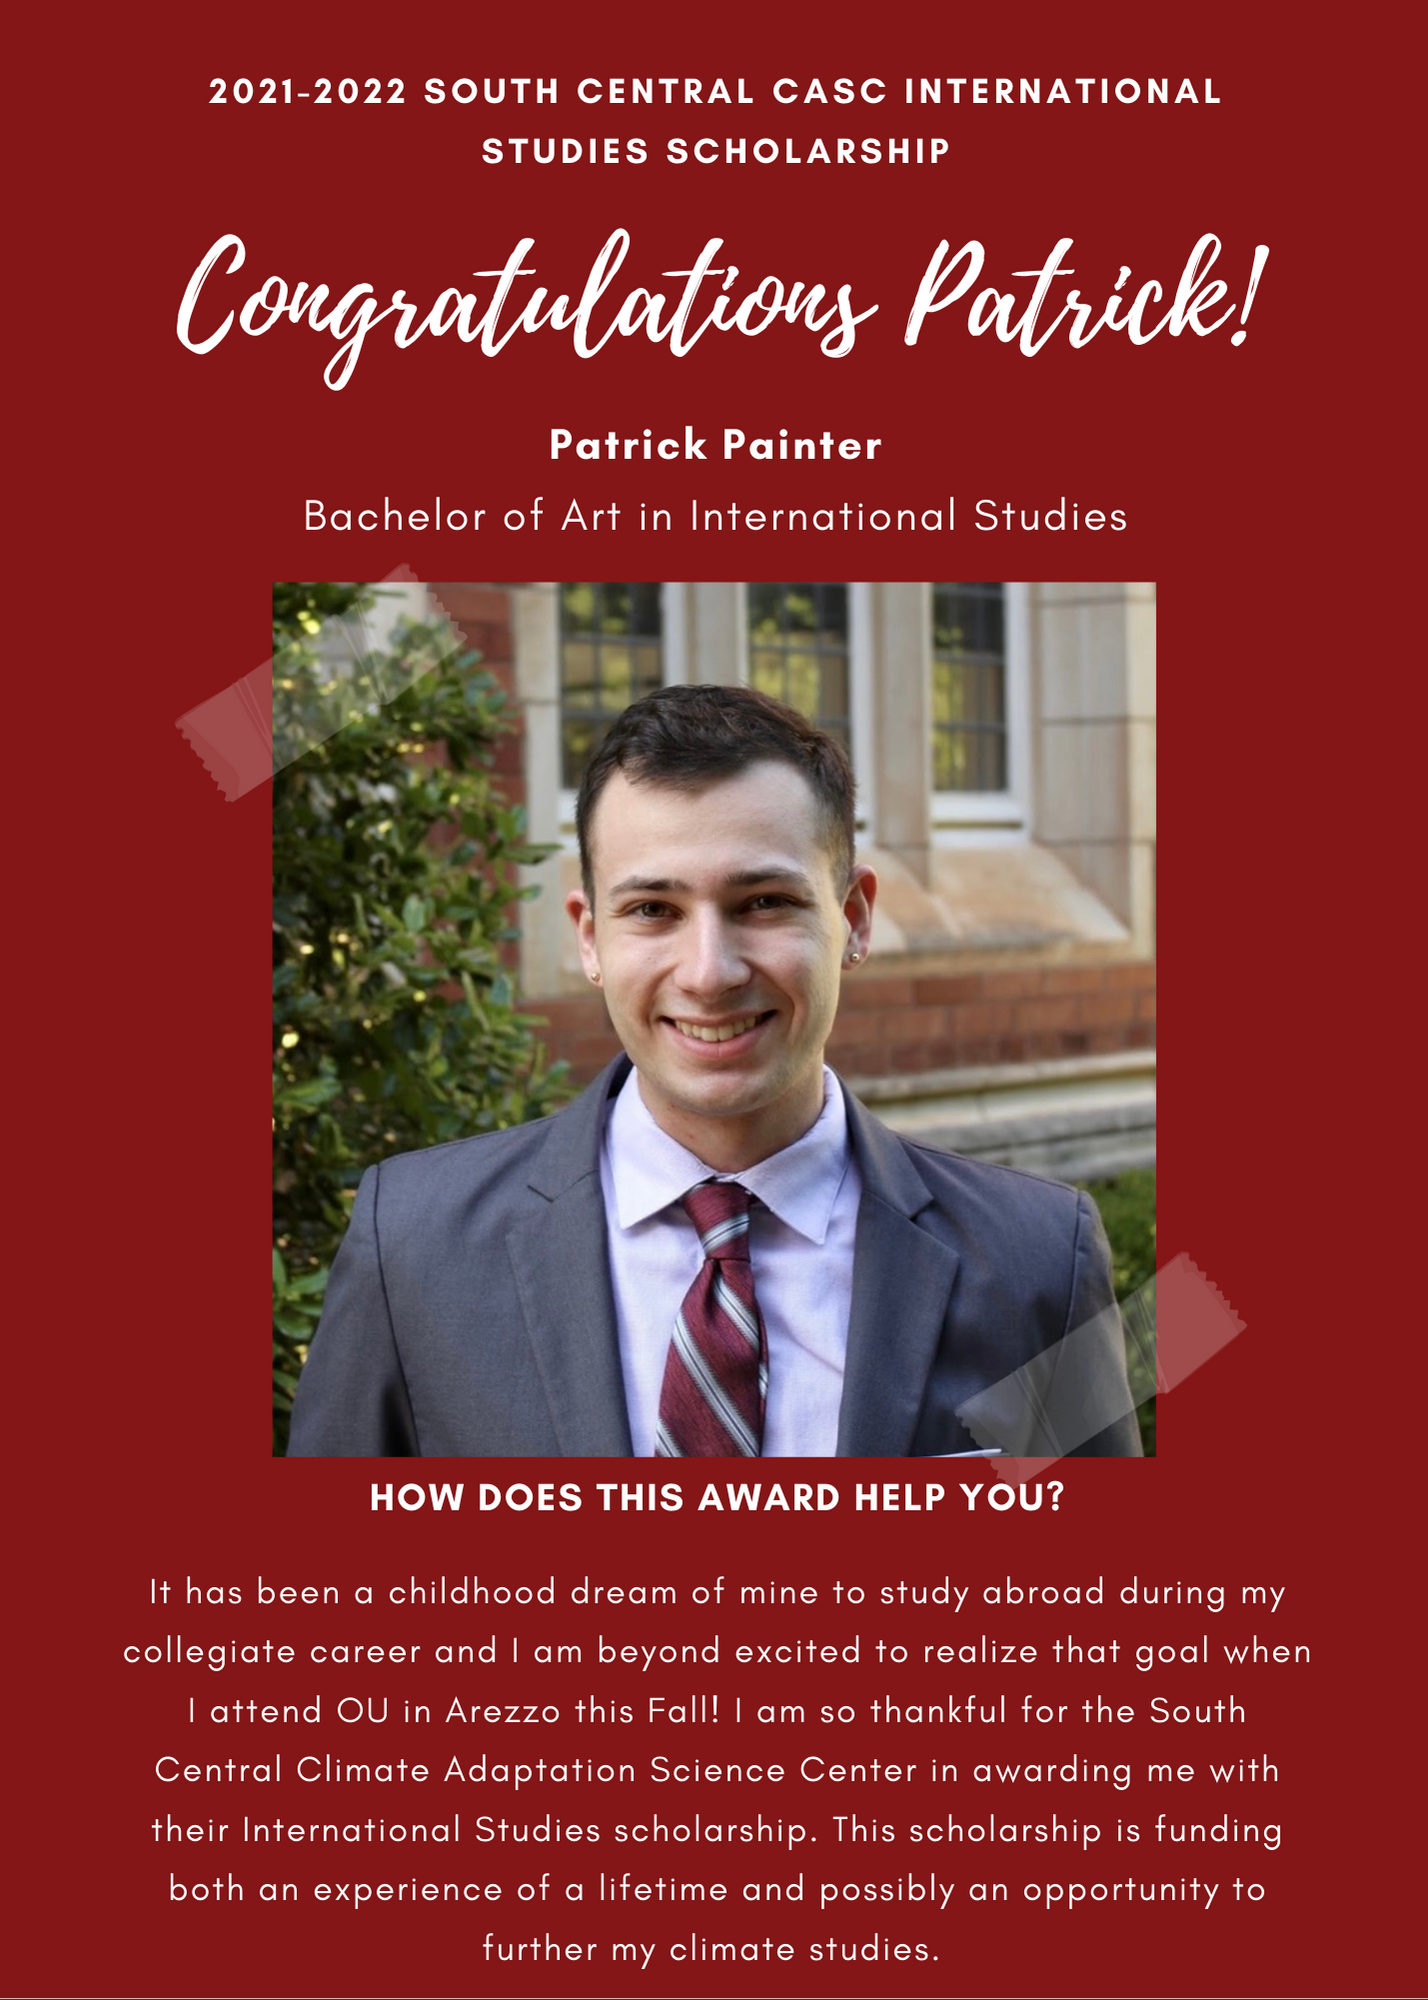 2021 -2022 A&GS South Central CASC International Studies Scholarship Congratulations Patrick! Patrick Painter Bachelor of Art in International Studies. How does this award help you? It has been a childhood dream of mine to study abroad during my collegiate career and I am beyond excited to realize that goal when I attend OU in Arezzo this fall! I am so thankful for the South Central Climate Adaptation Science Center in awarding me their international studies scholarship. This scholarship is funding both an experience of a lifetime and possibly an opportunity to further my climate studies.